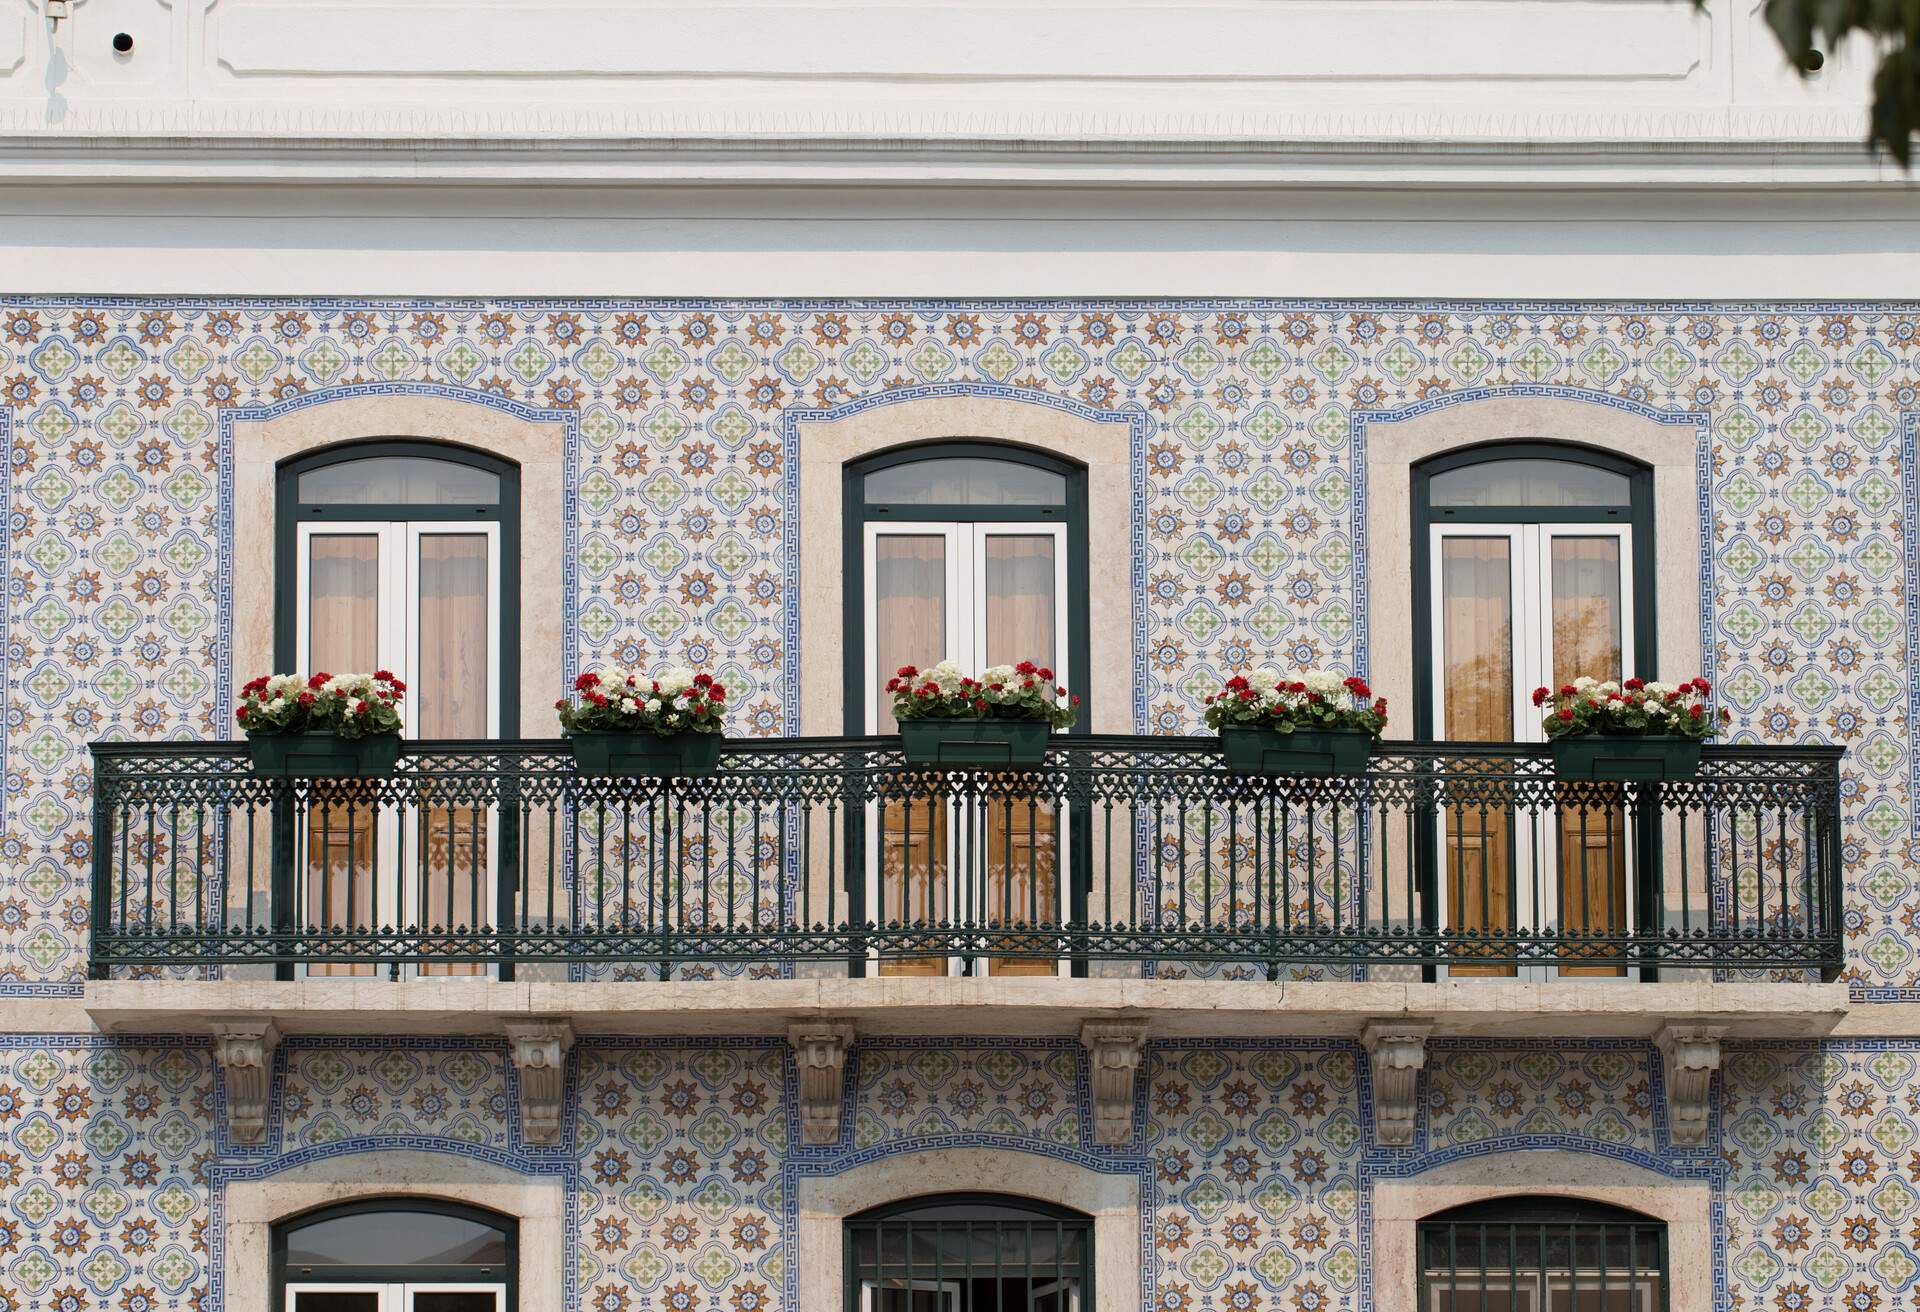 A beautiful balcony adorned with flowering plants and colourful ceramic tiles wall.